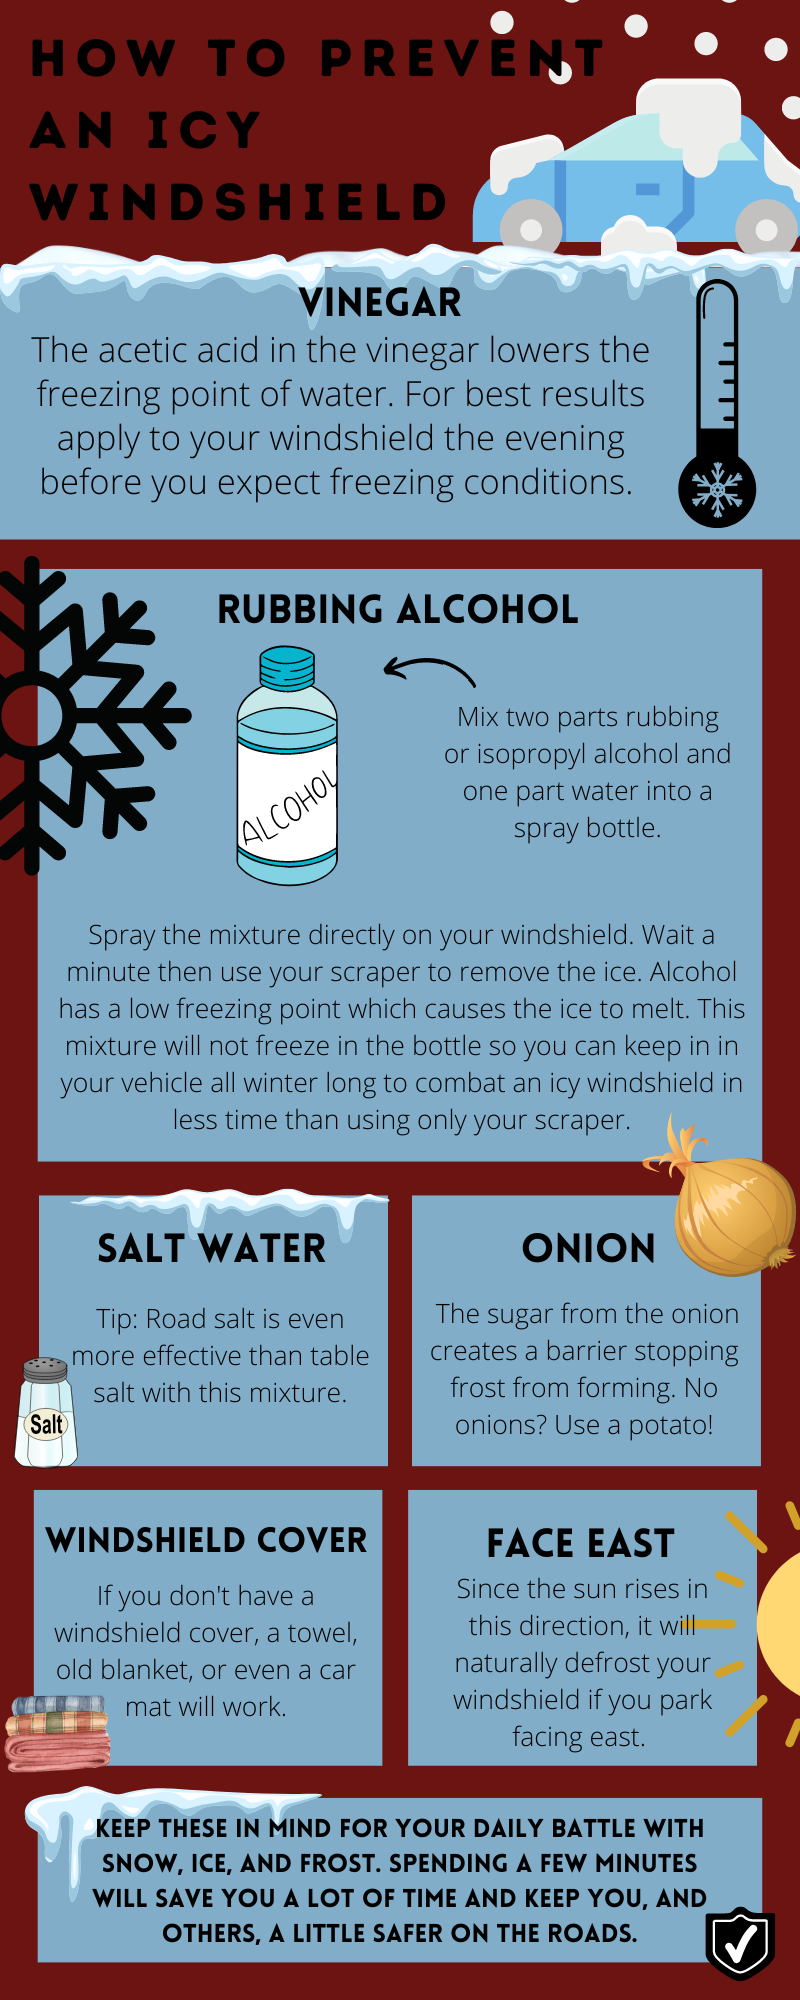 How to Prevent an Icy Windshield